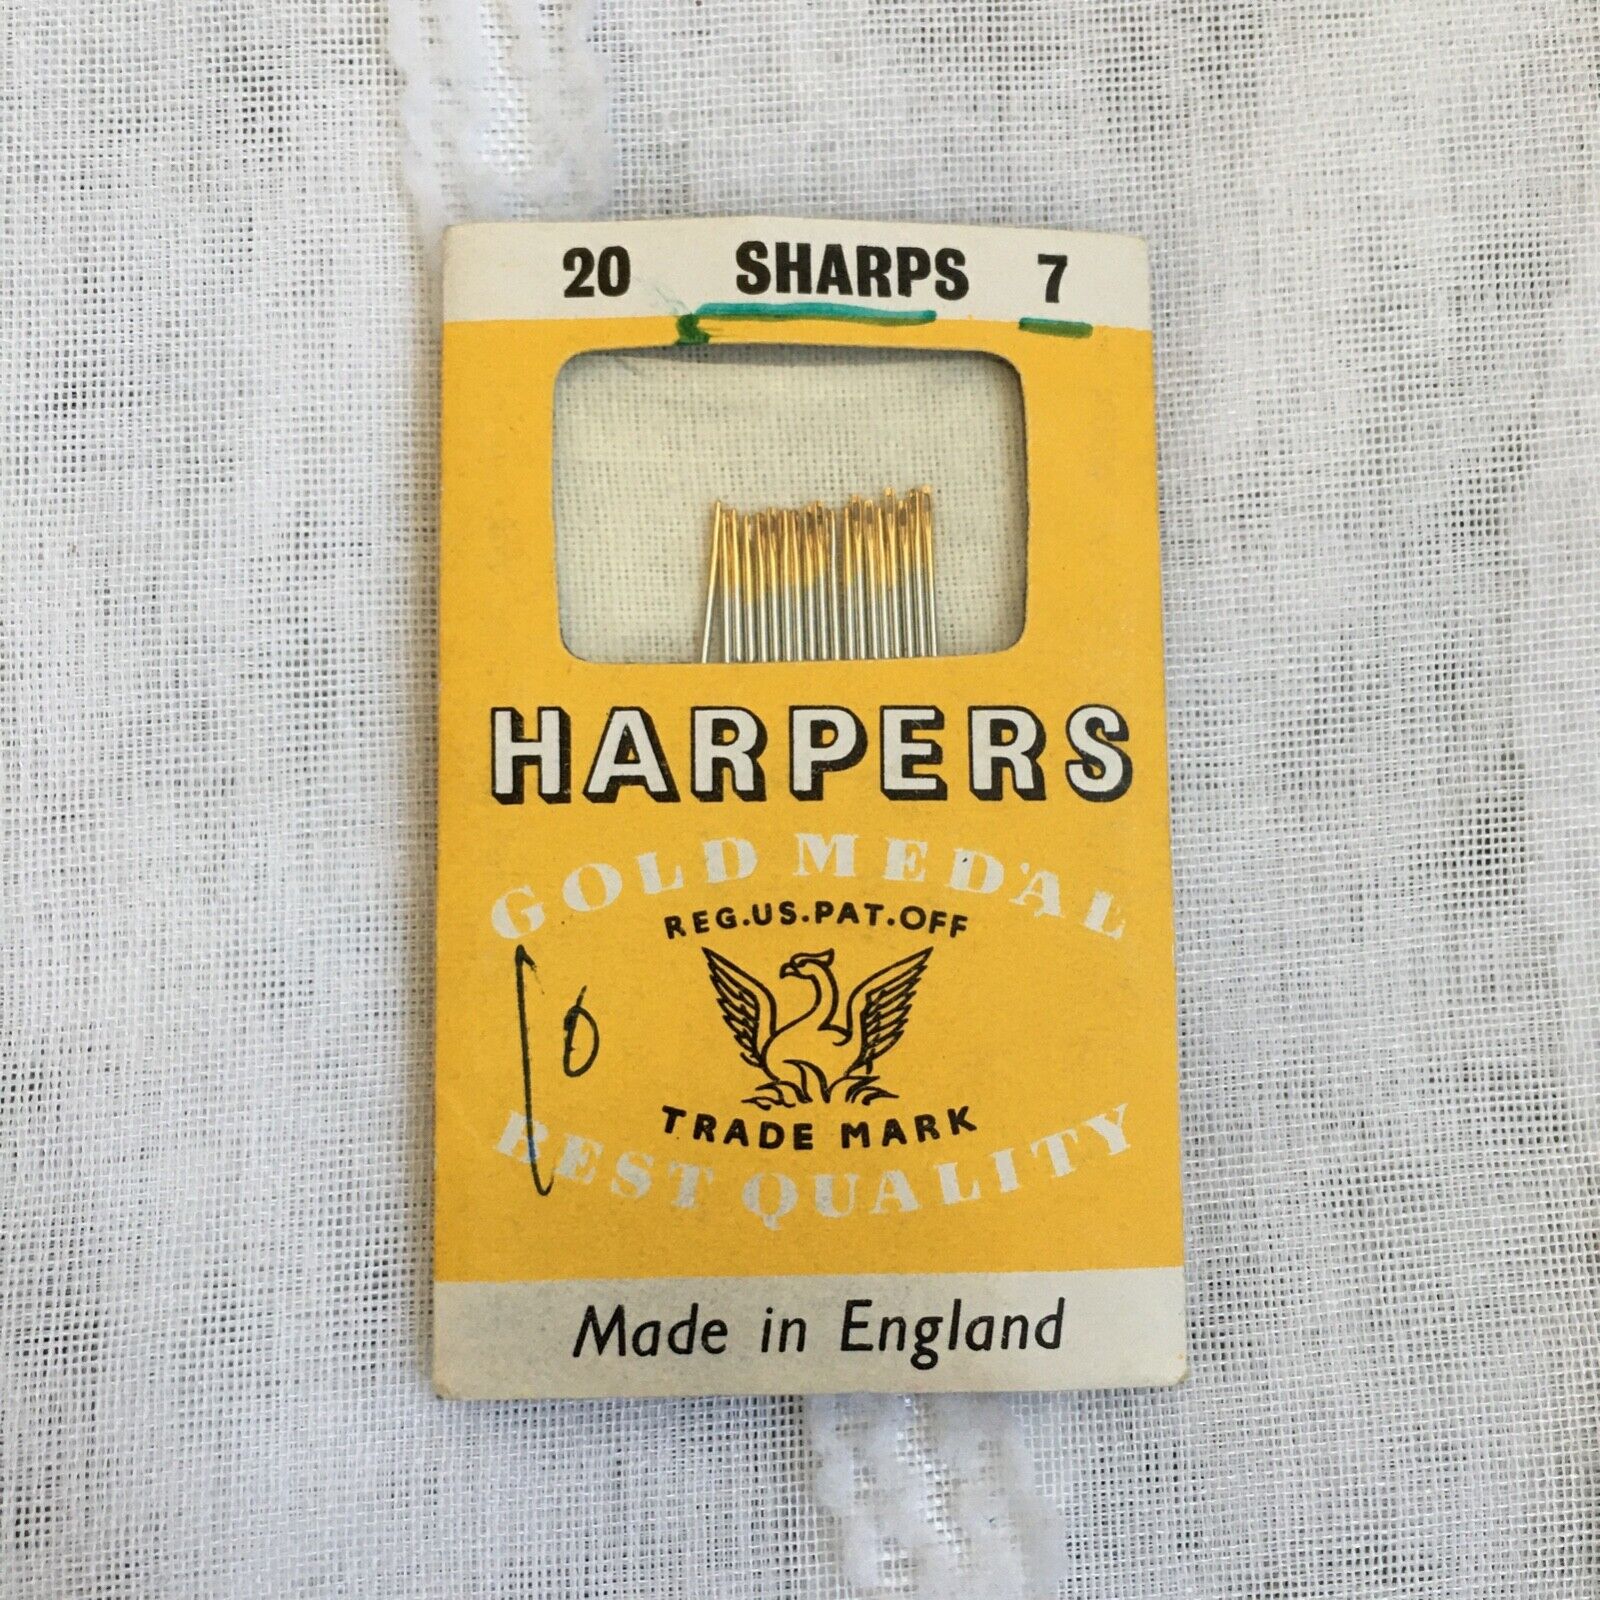 VTG Harper's Gold Medal Best Quality Needles Made in England 19 Count